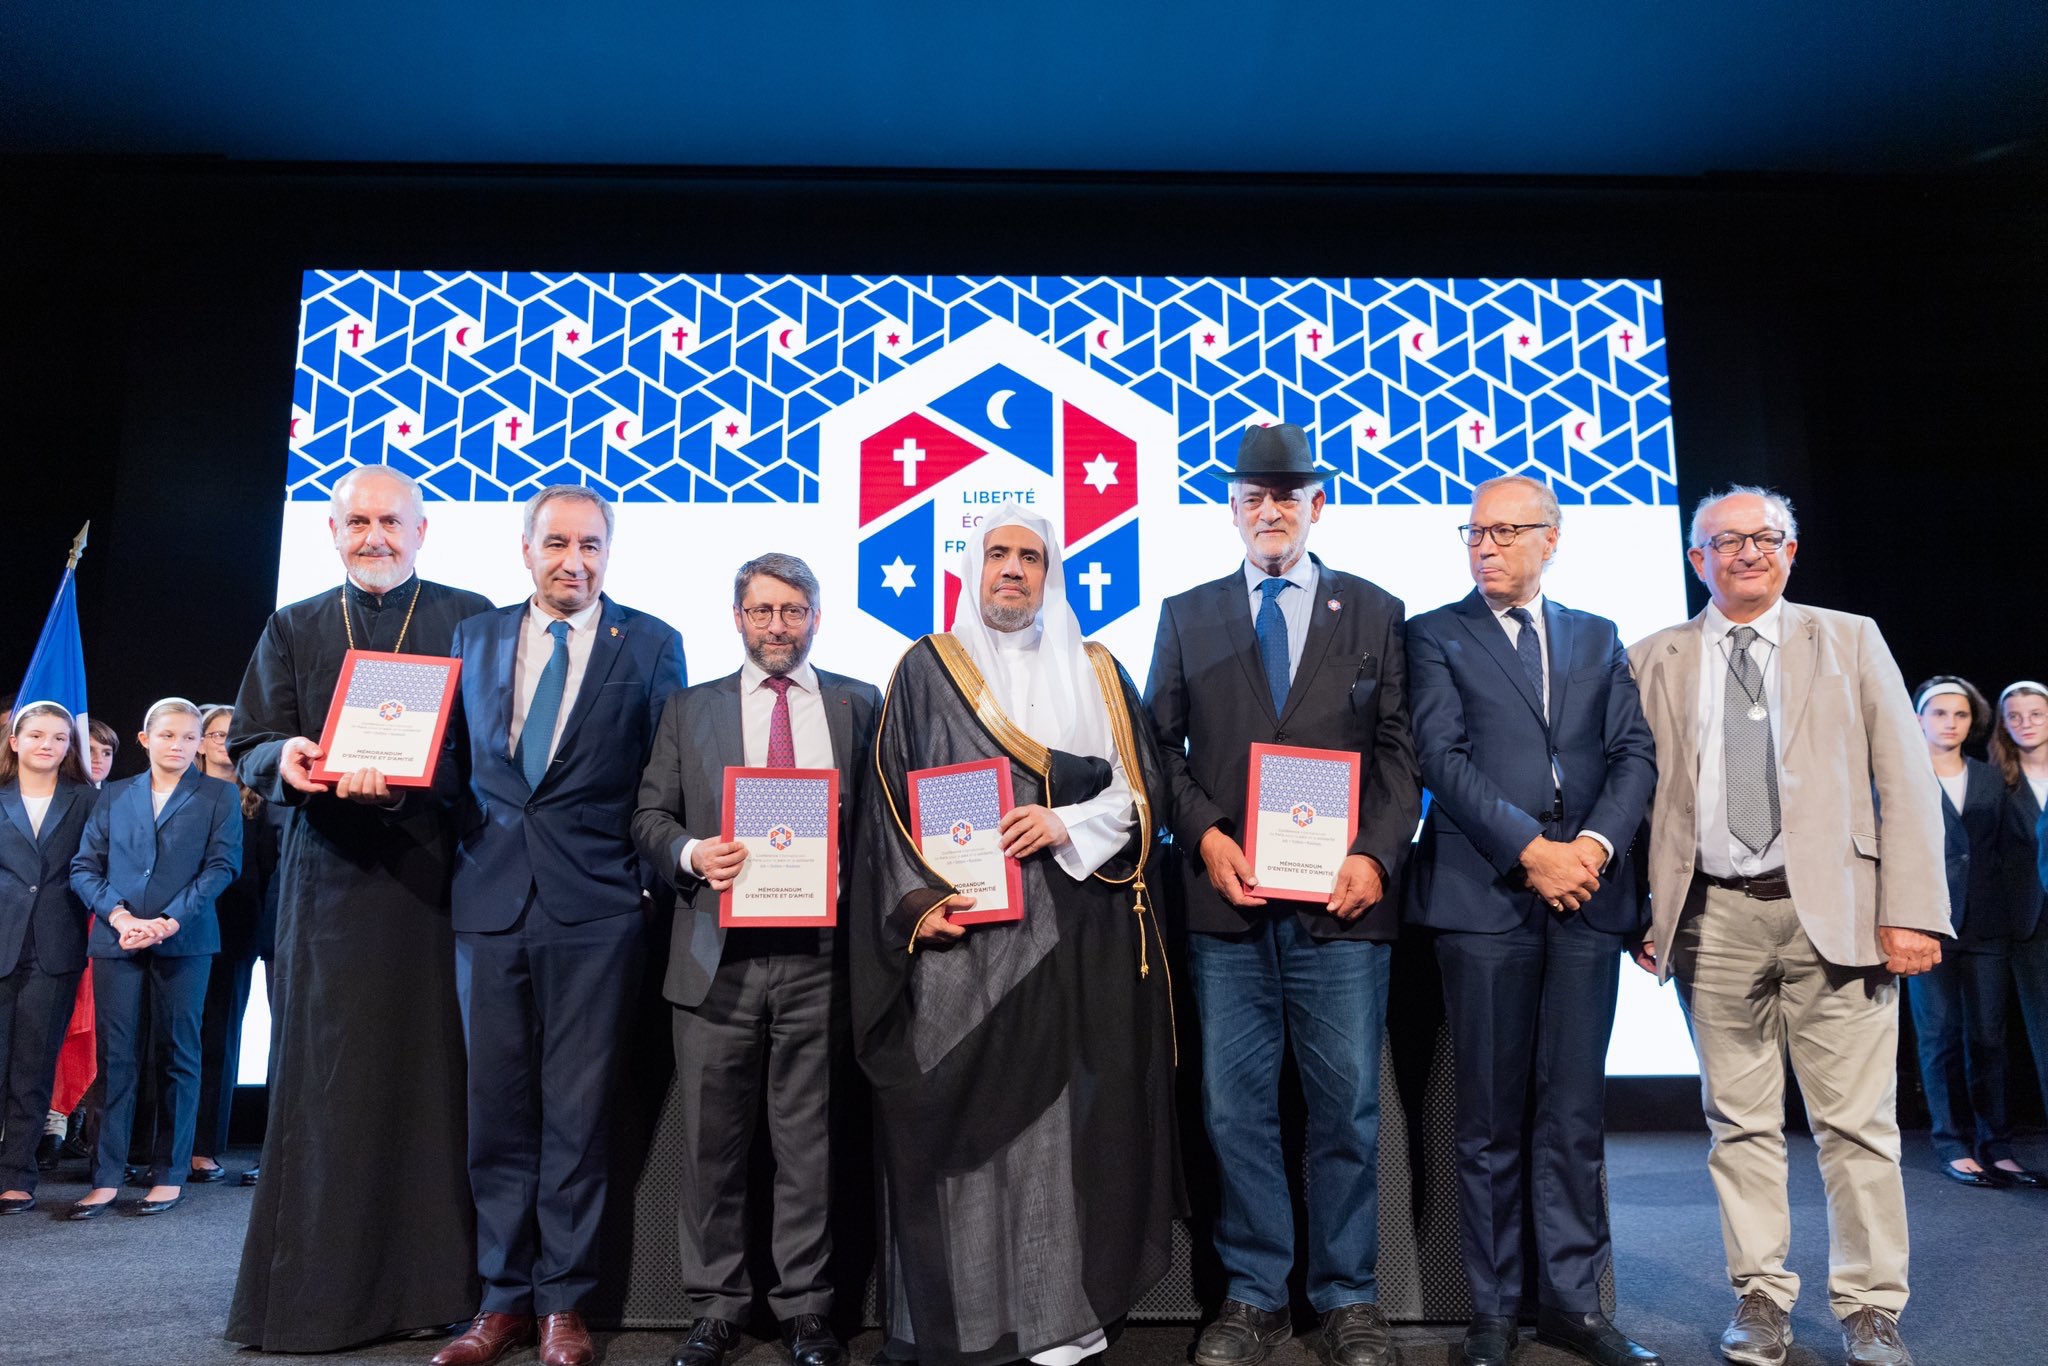 HE Dr. Mohammad Alissa stood with prominent Muslim, Jewish and Christian leaders to sign a historic MOU, pledging to continue meaningful interfaith dialogue